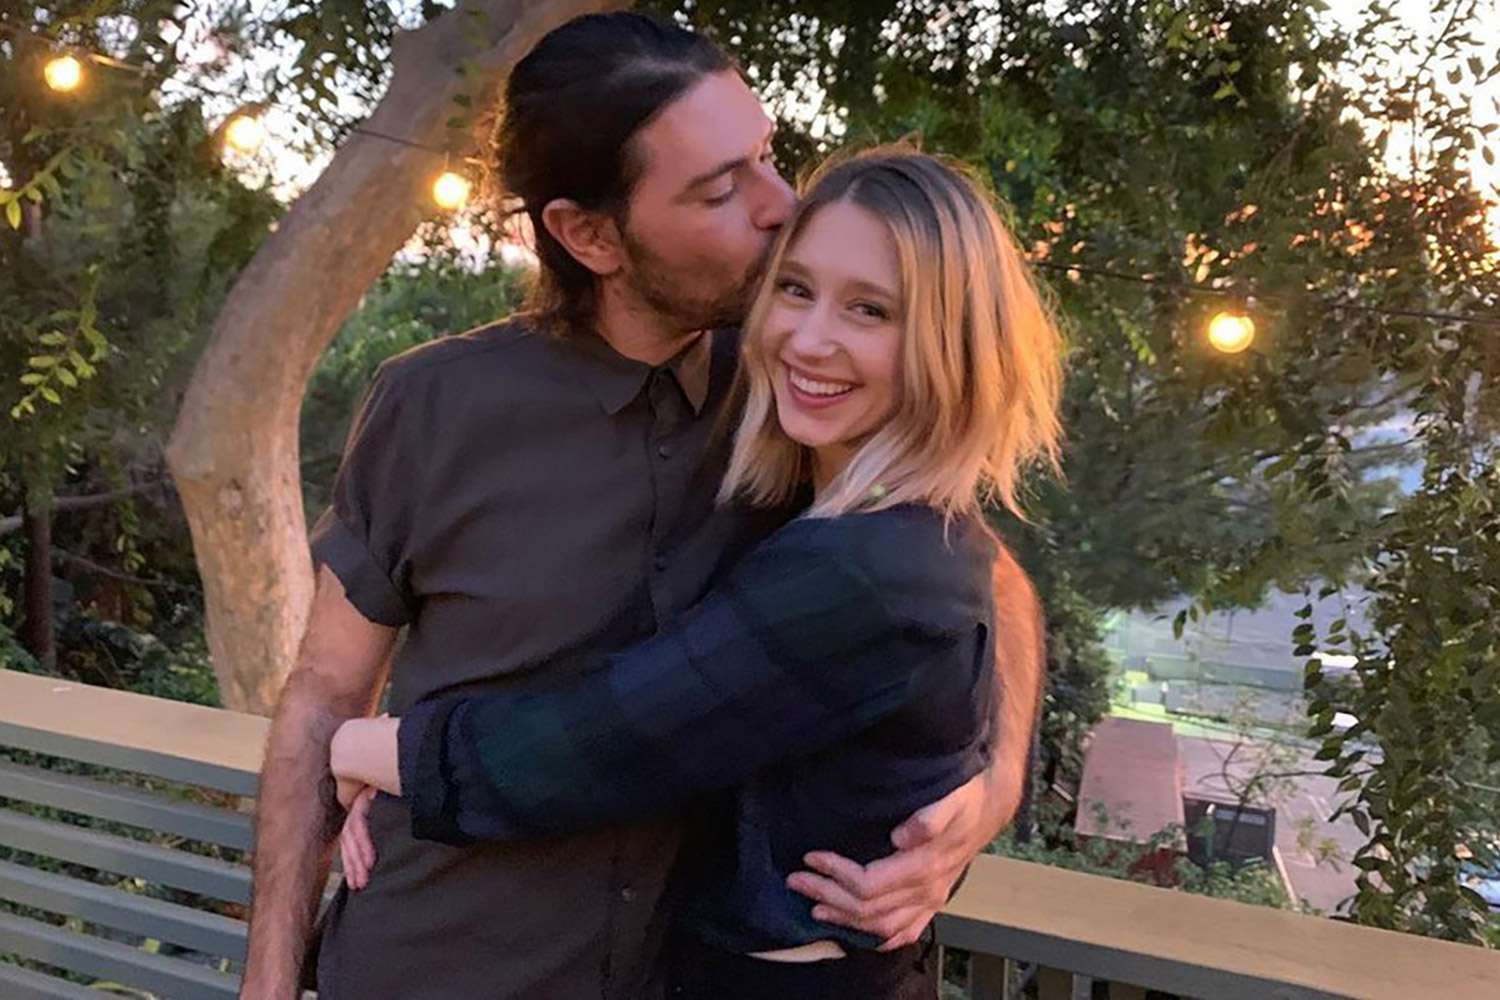 <p>The American Horror Story star, 26, secretly tied the knot with her now-husband, filmmaker Hadley Klein, 37, on Aug. 8.</p>
                            <p>"Married my best friend," she captioned an Instagram photo, which was taken during what appears to be their intimate ceremony.</p>
                            <p>Klein shared an identical post, captioning his, "Still feeling thankful this year ✌🏼."</p>
                            <p>The lovebirds seemingly held their nuptials safely amid the coronavirus pandemic as Farmiga is pictured wearing a cute, white face mask embellished with the word "Bride." No wedding guests can be seen in the photo, which also captures the happy couple's wedding cake.</p>
                            